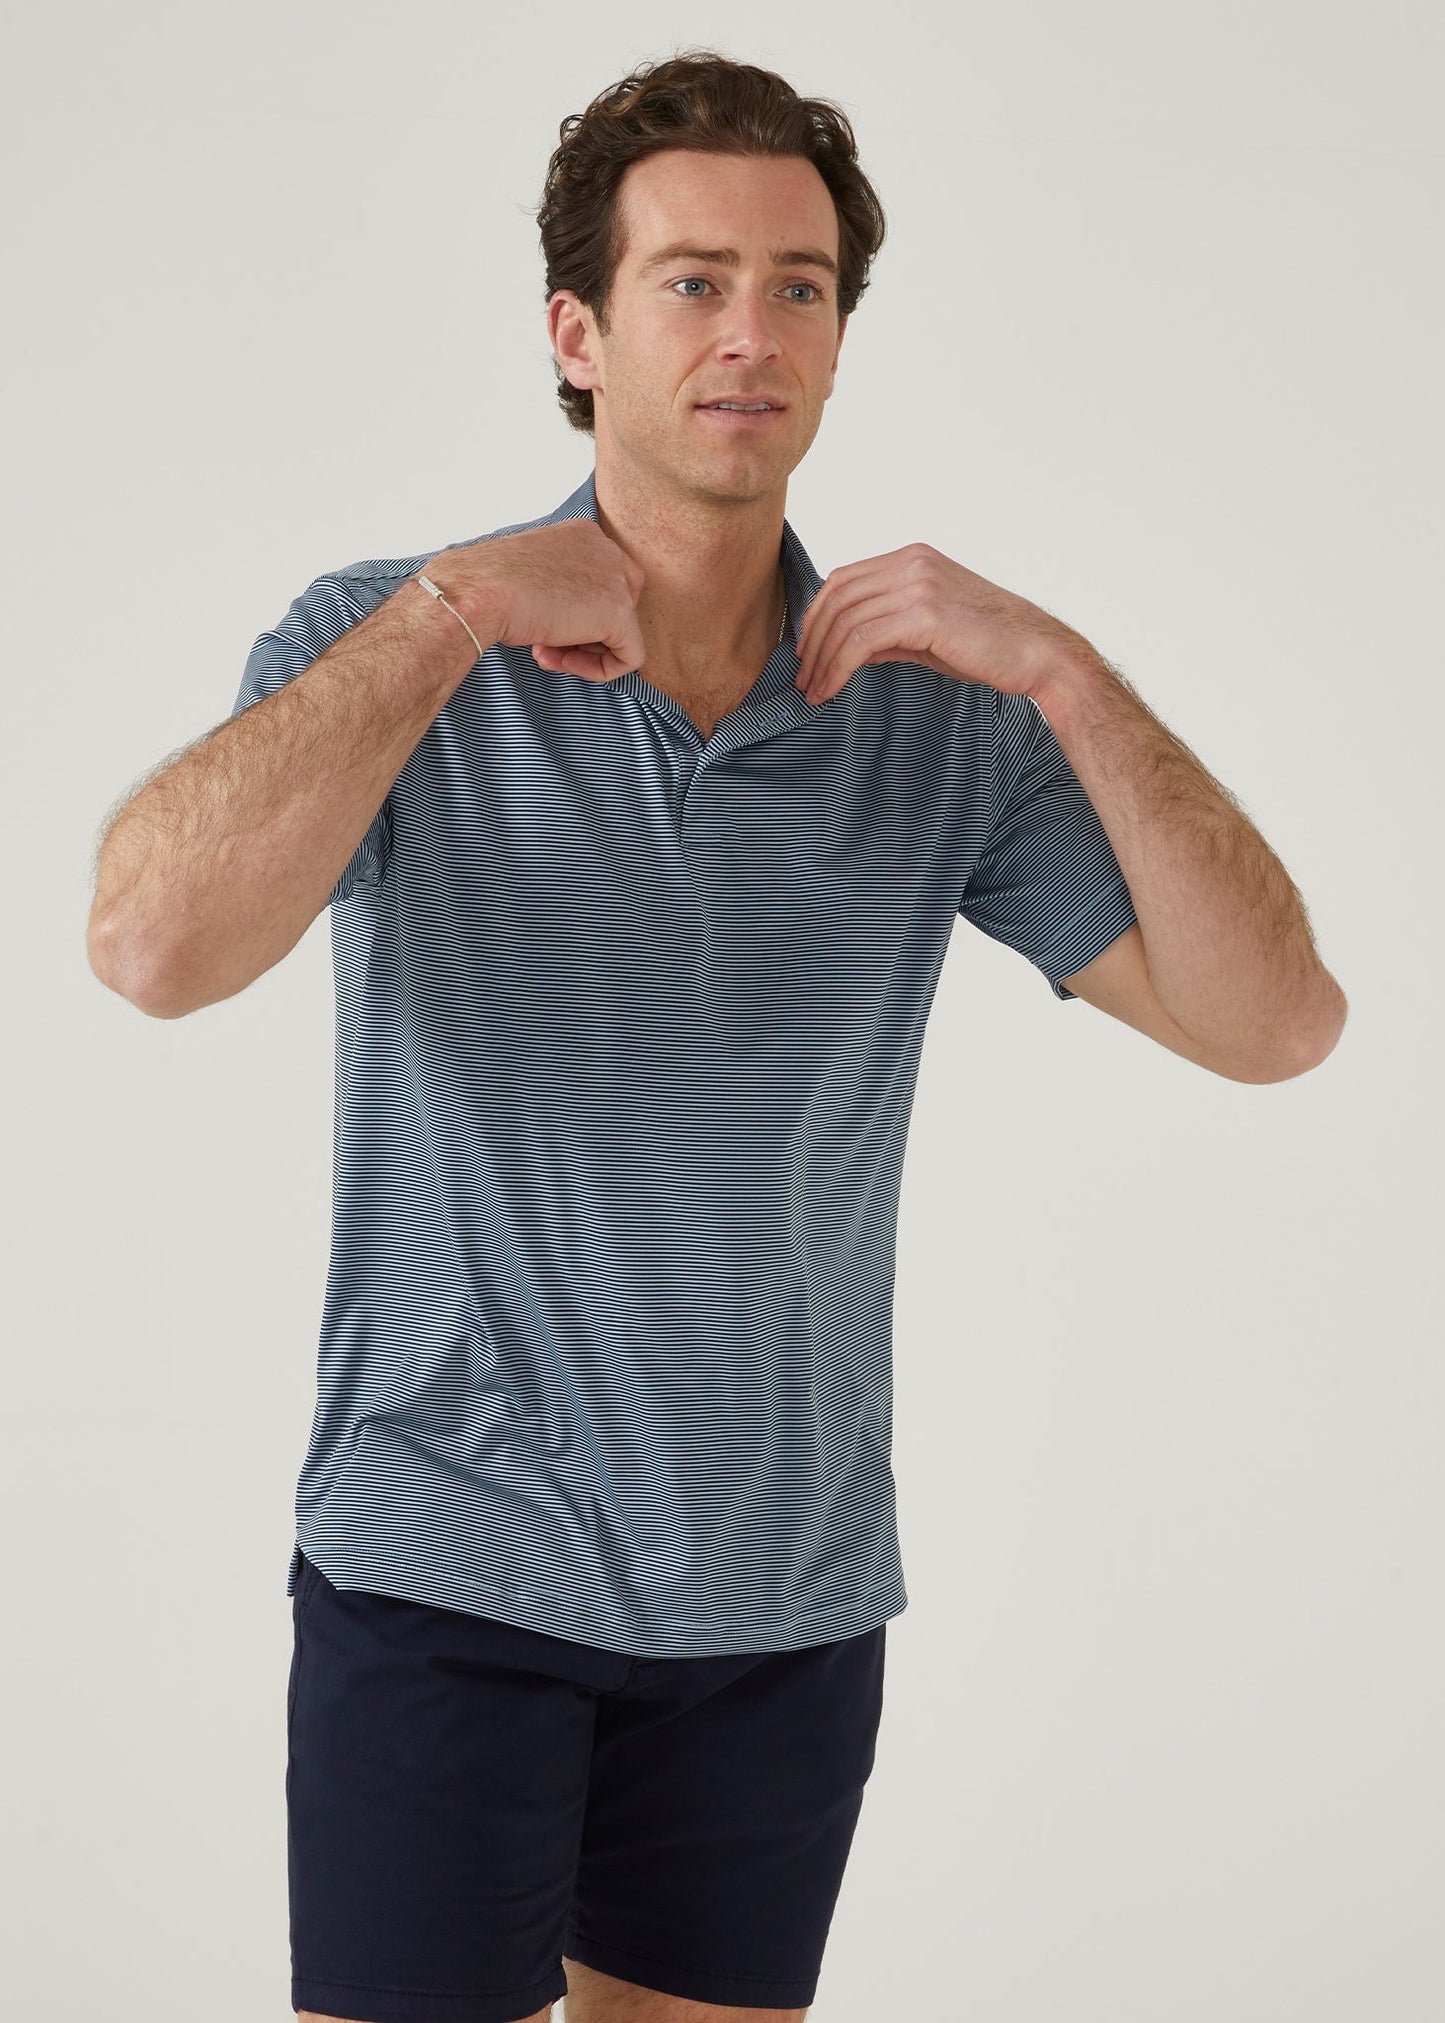 3 button short sleeve polo with Navy & light blue stipes.